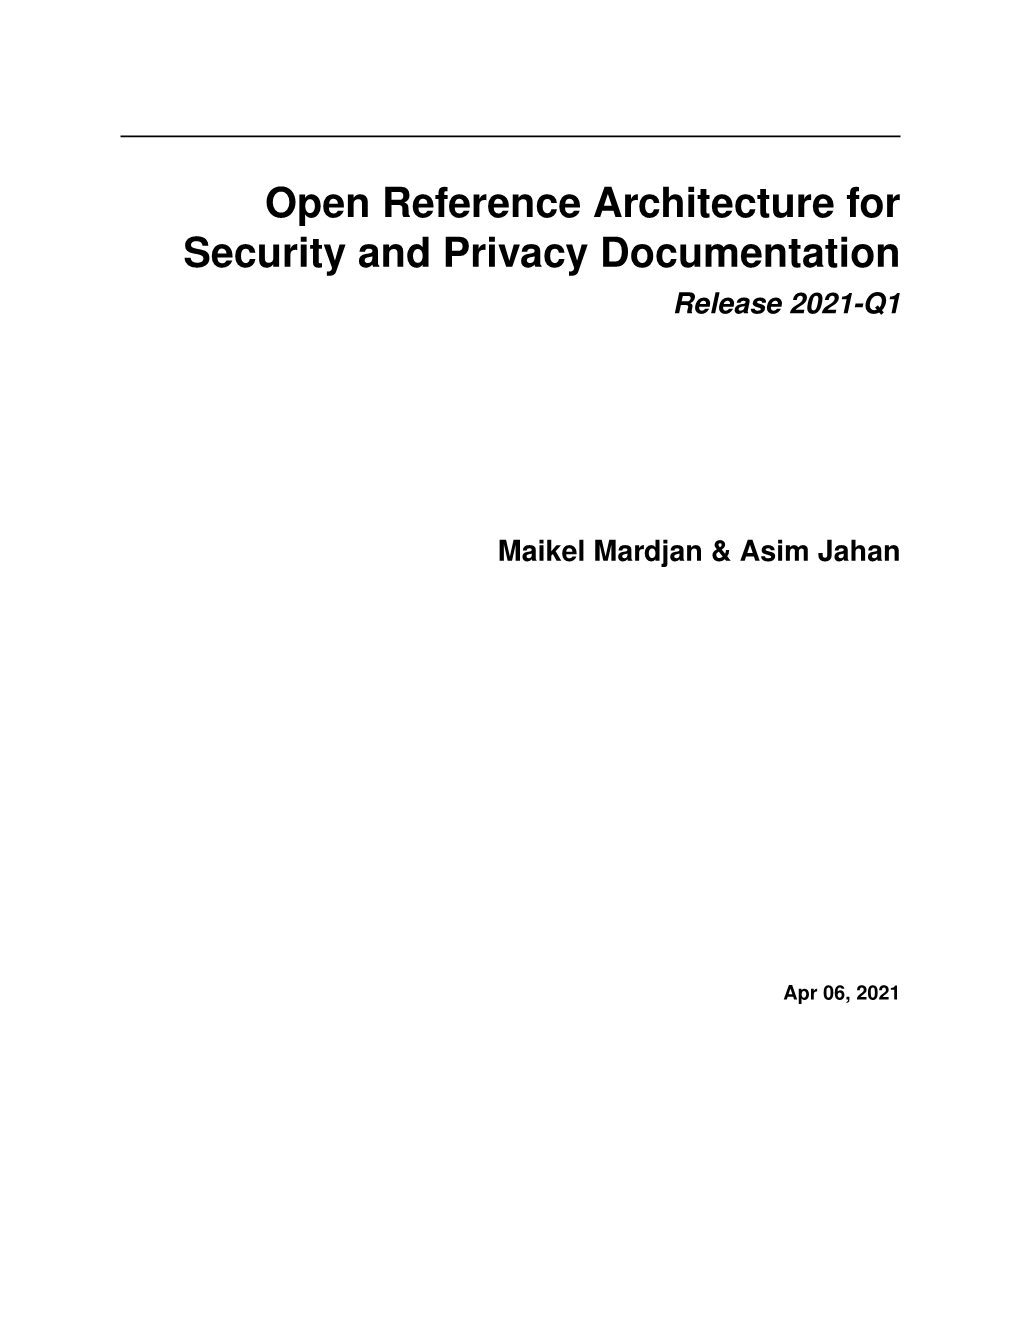 Open Reference Architecture for Security and Privacy Documentation Release 2021-Q1